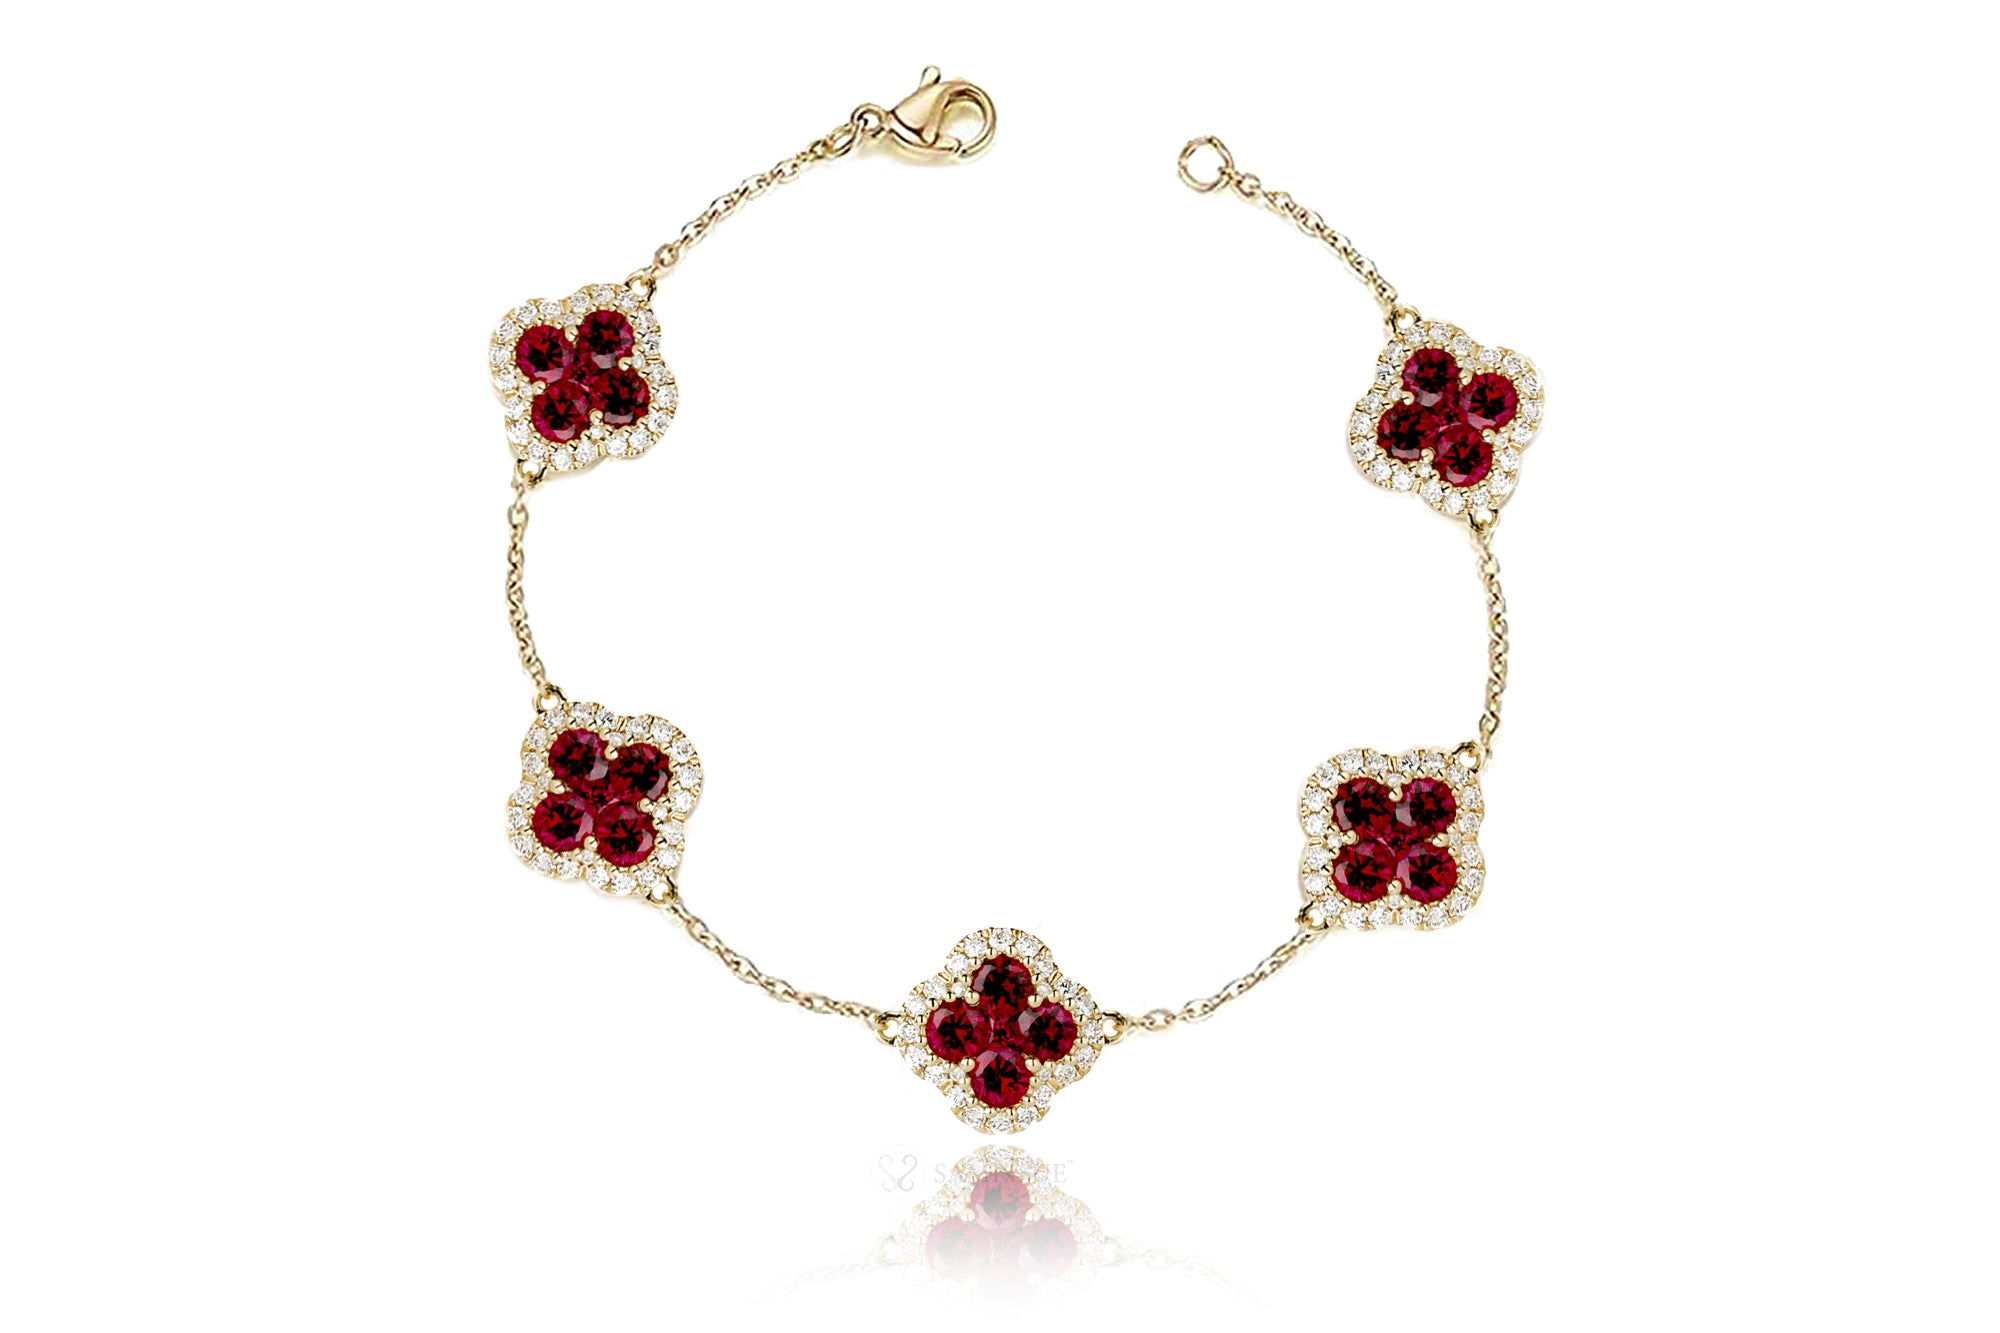 Clover bracelet with rubies and diamonds